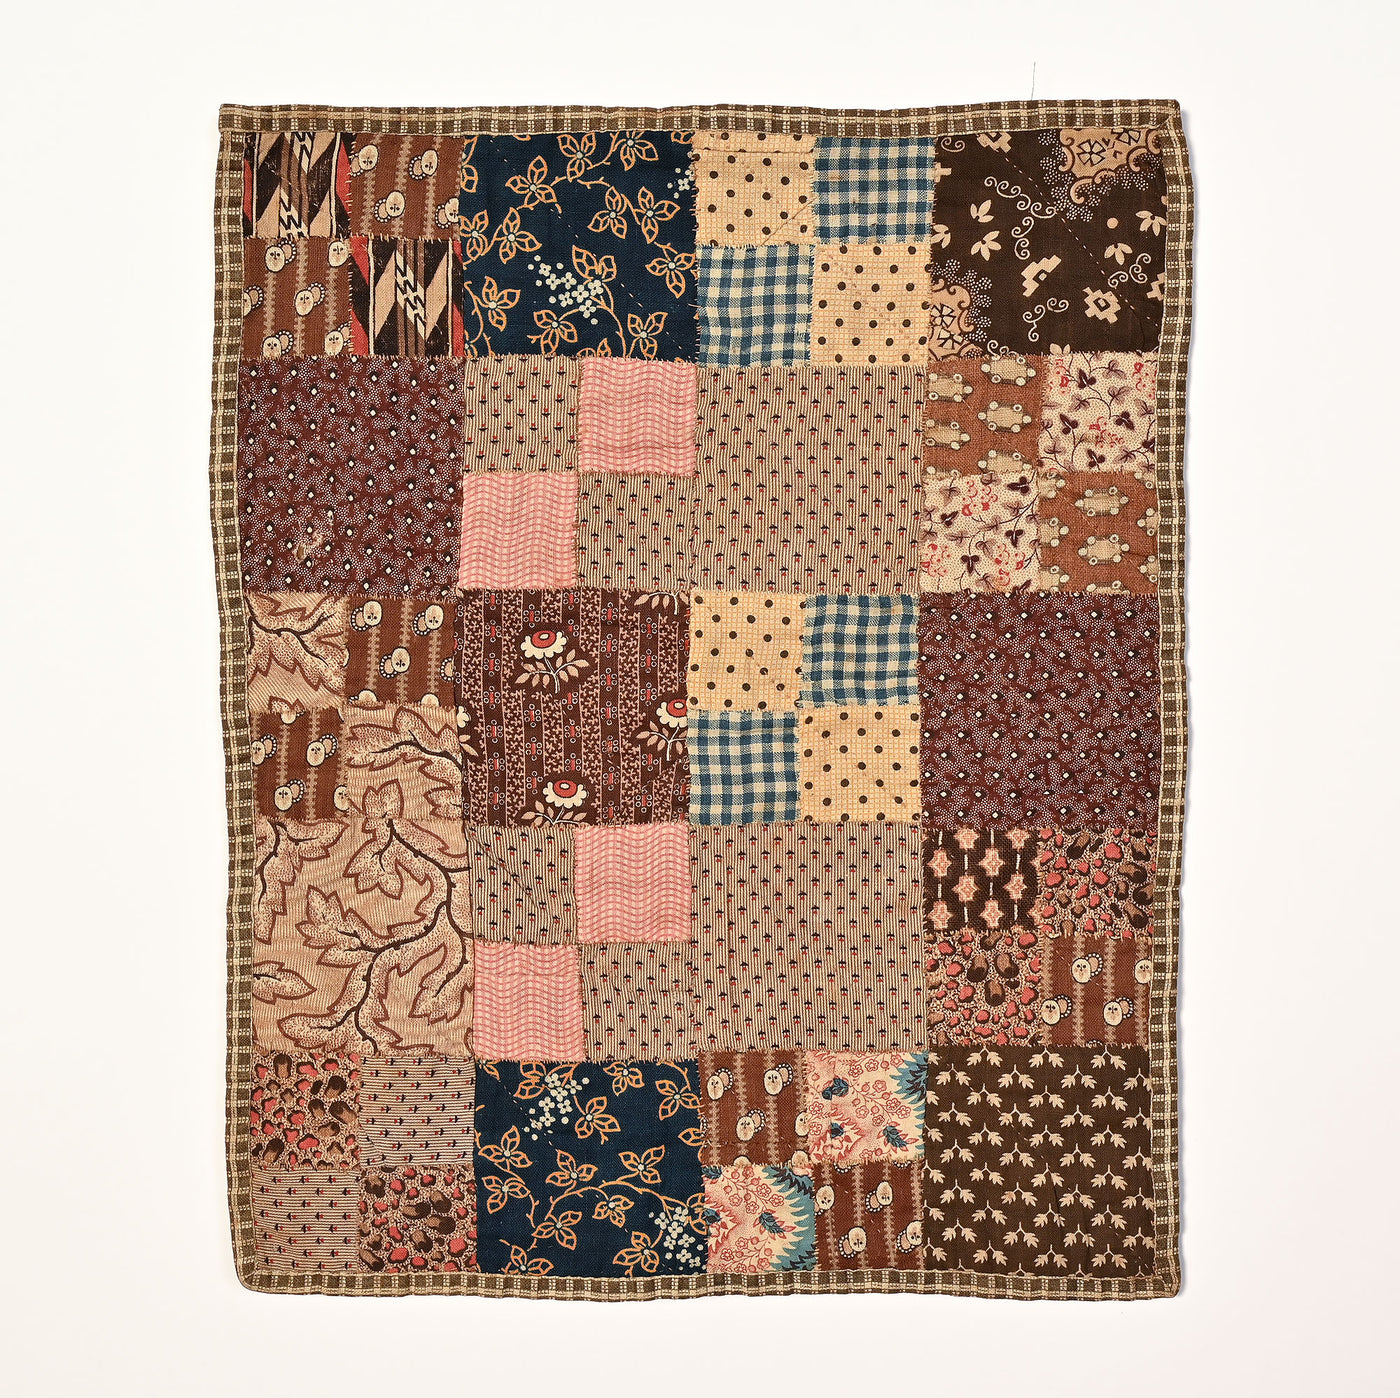 Four Patch Doll Quilt: Circa 1850